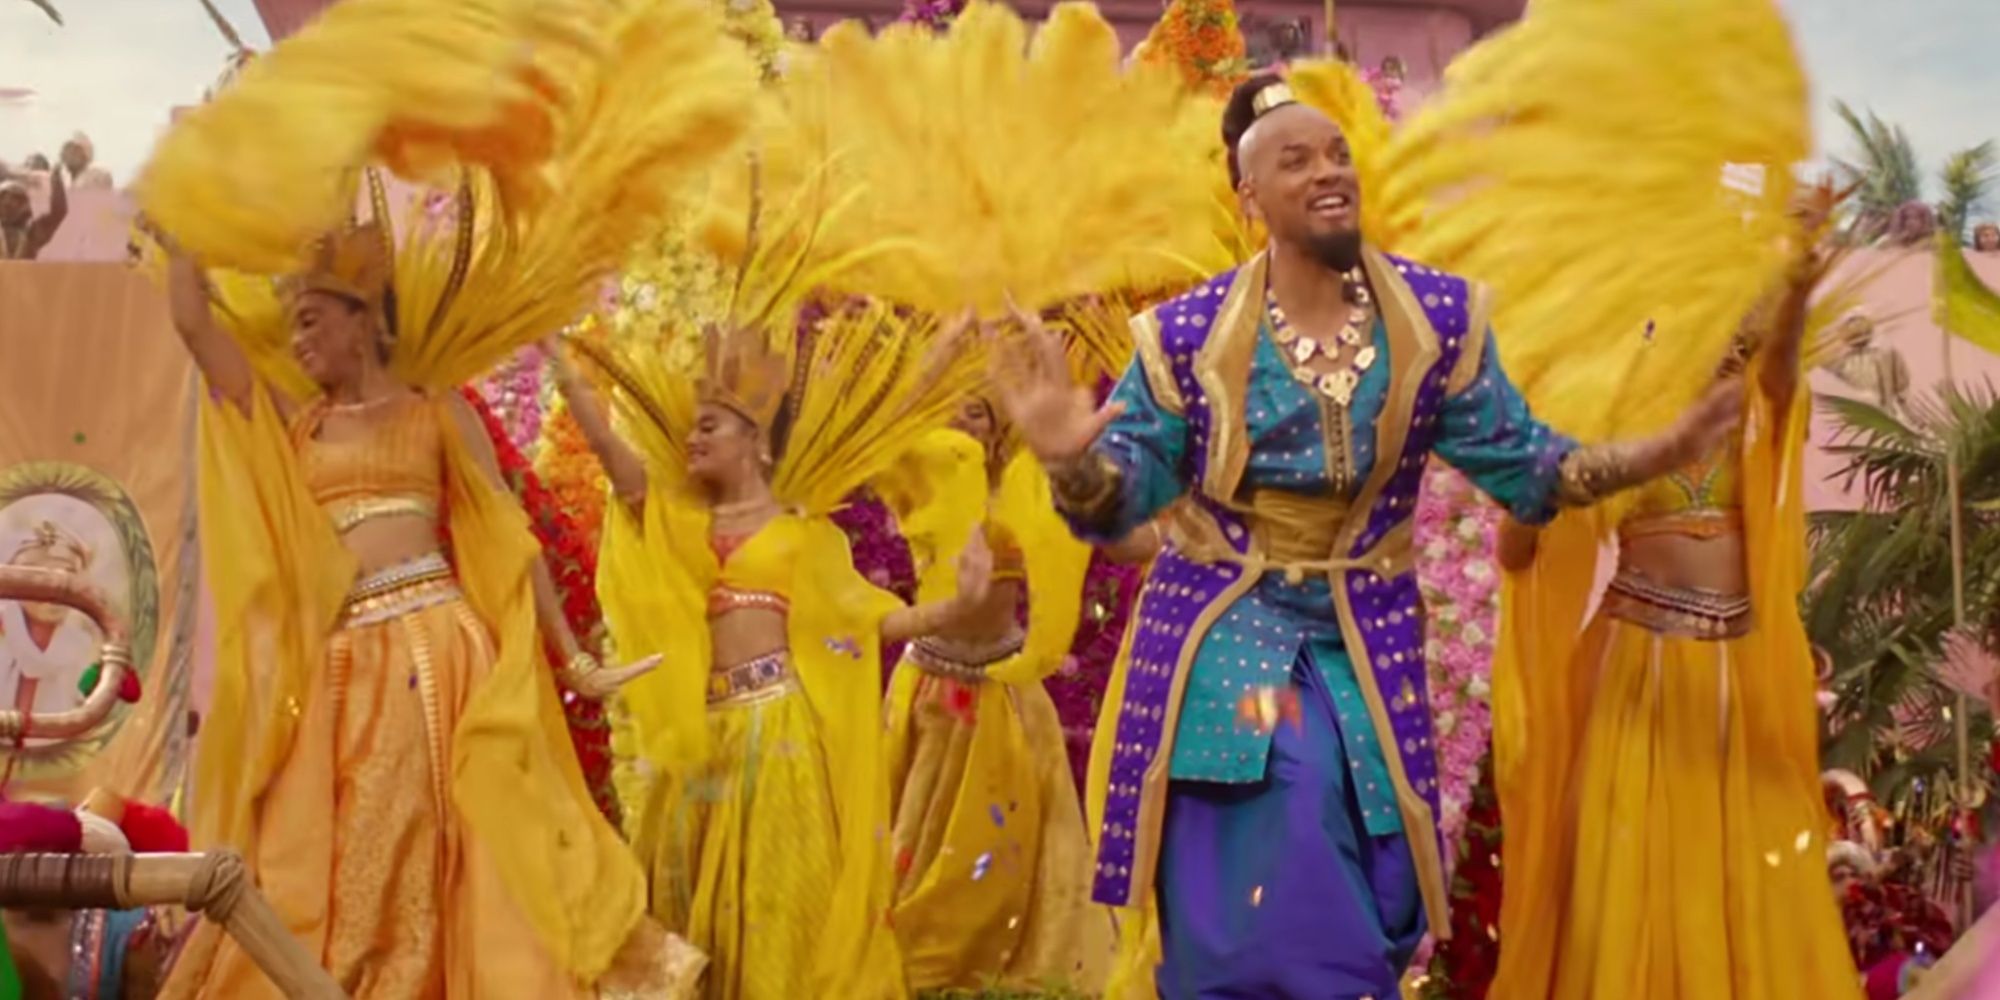 Will Smith as Genie dances and sings along with elephants and colorful backup dancers to introduce the new and improved Prince Ali.